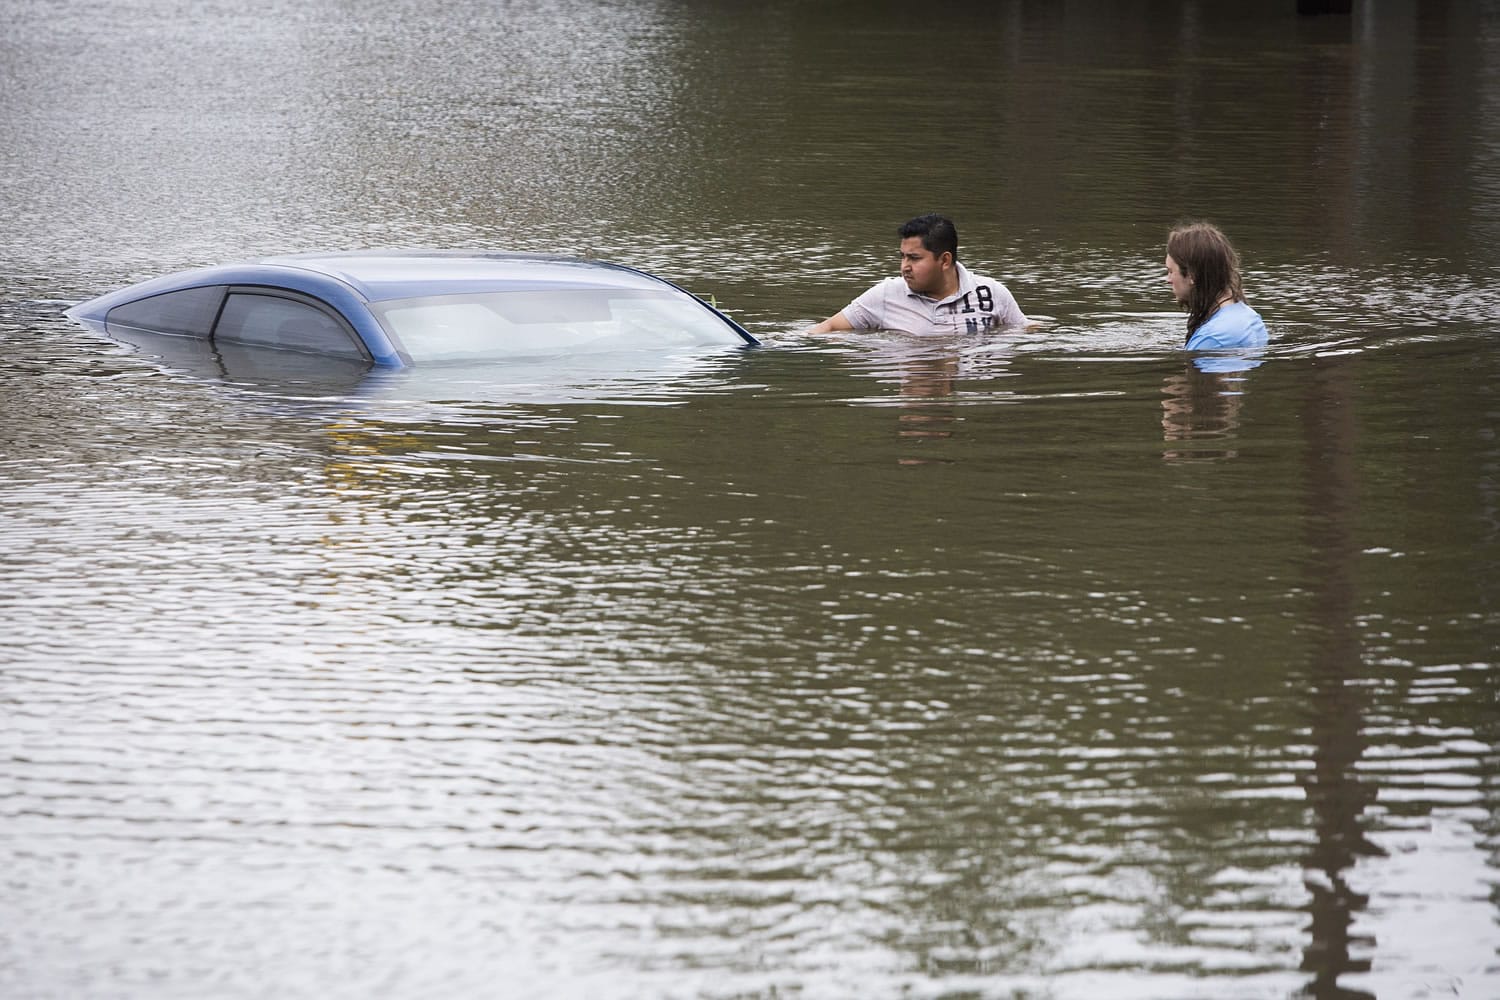 Roberto Salas, left, and Lewis Sternhagen check a flooded car on a frontage road near the Willow Waterhole Bayou on Tuesday in Houston.